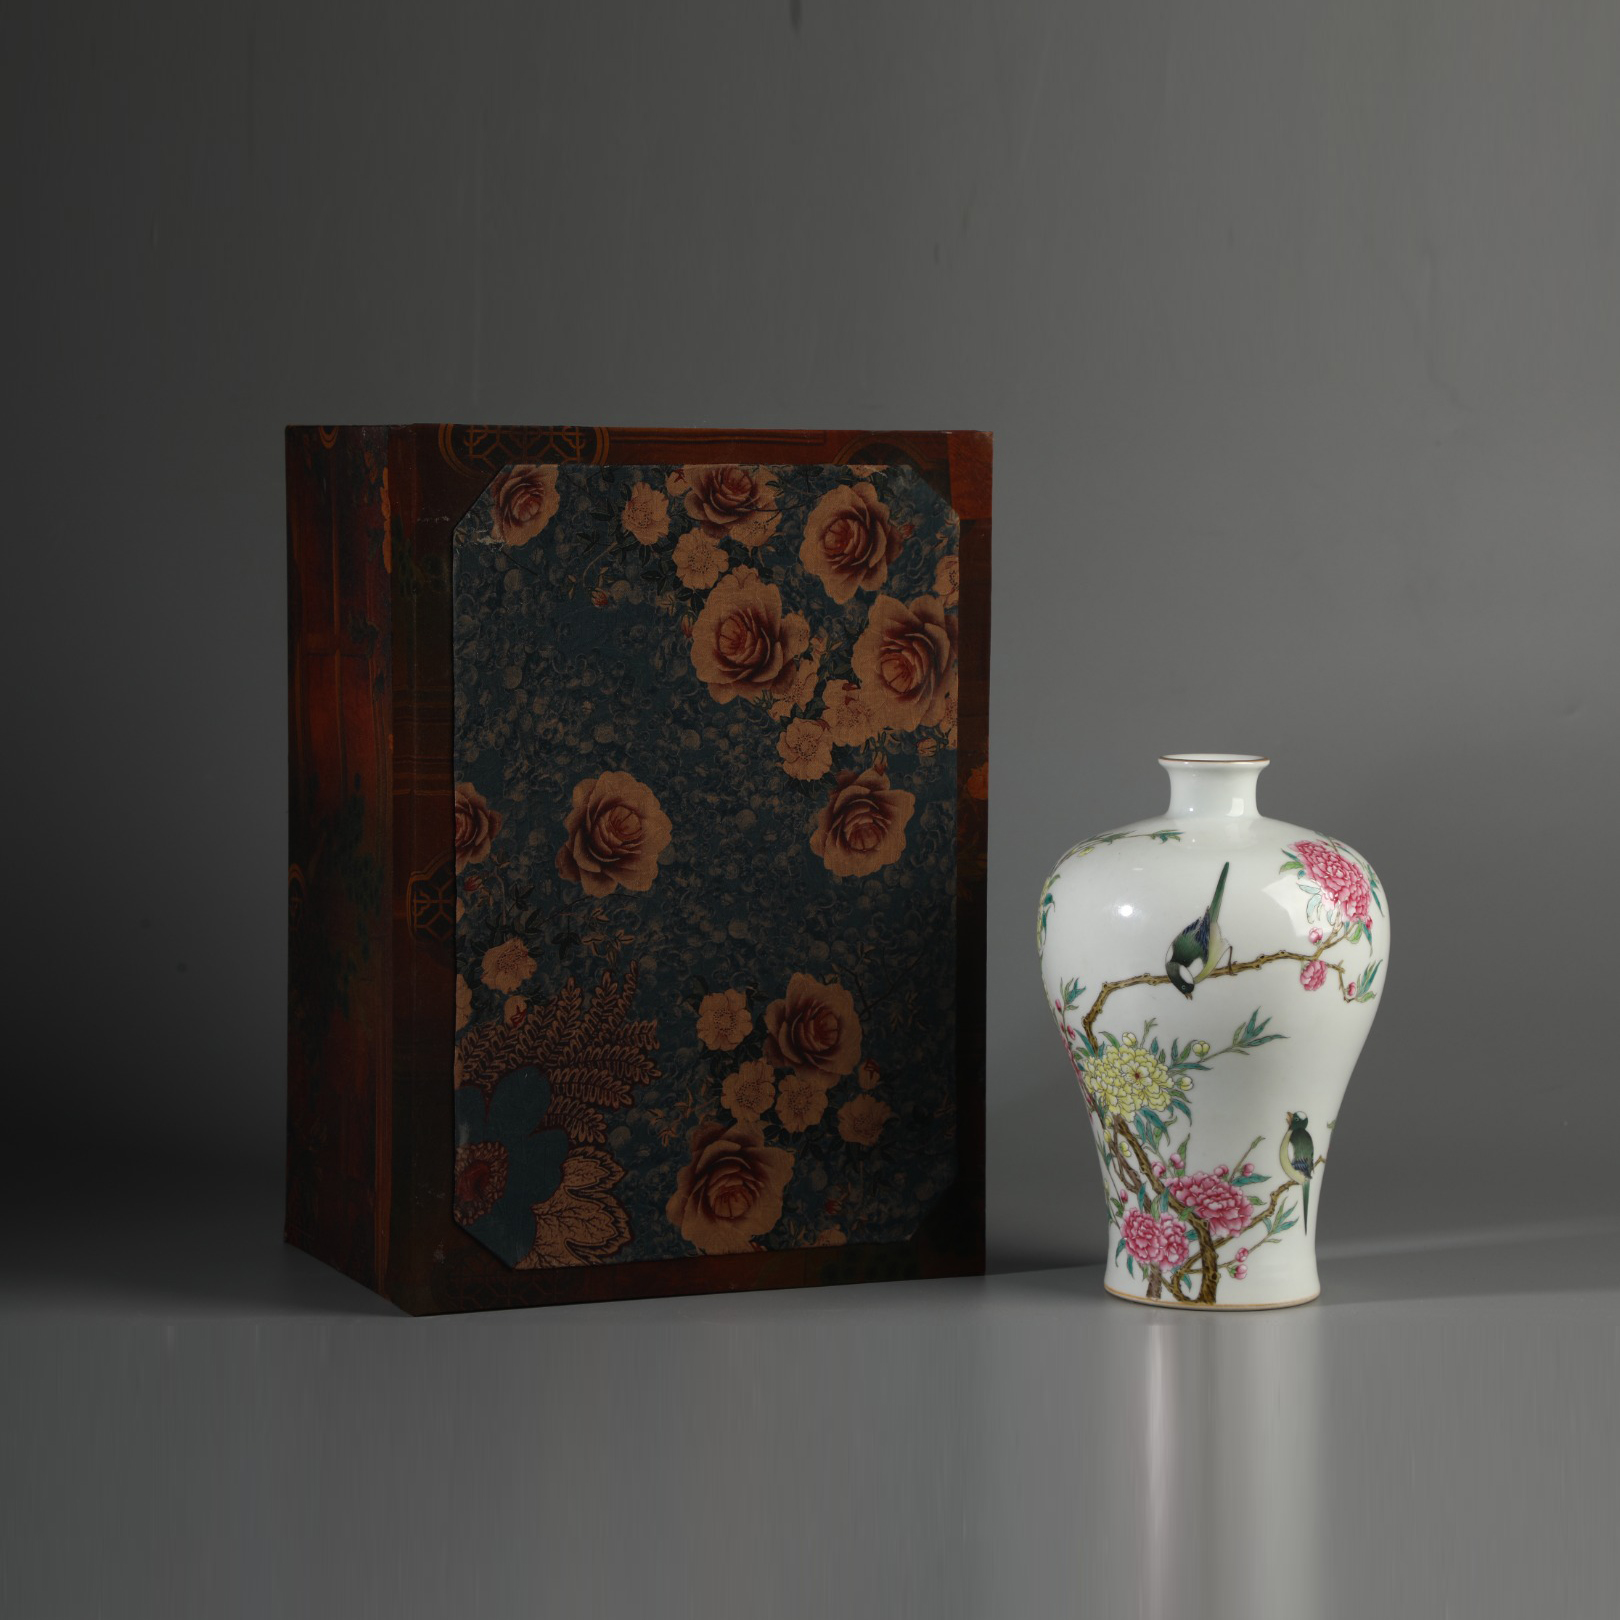 Famille rose plum vase made during the Yongzheng period of the Qing Dynasty